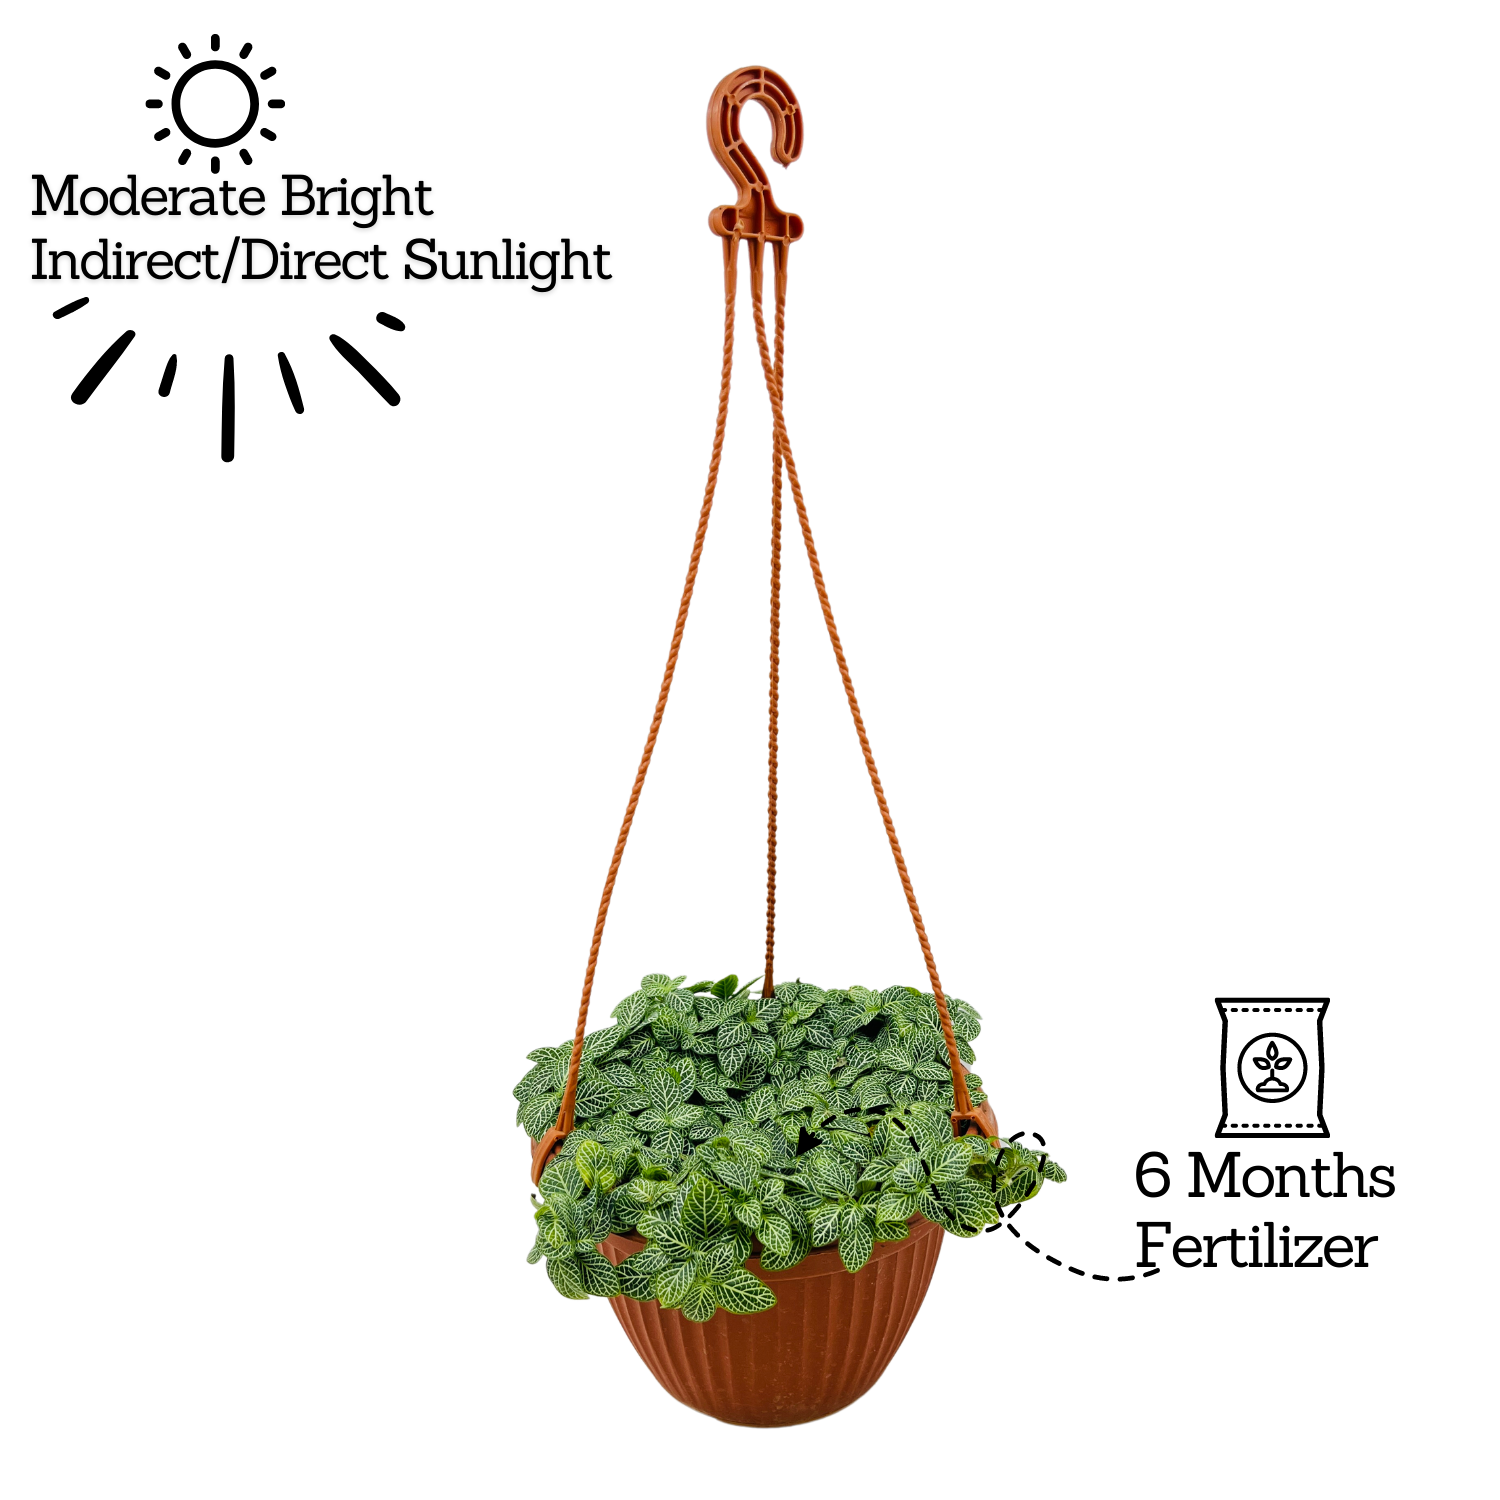 Fittonia Green Plant Hanging With Pot